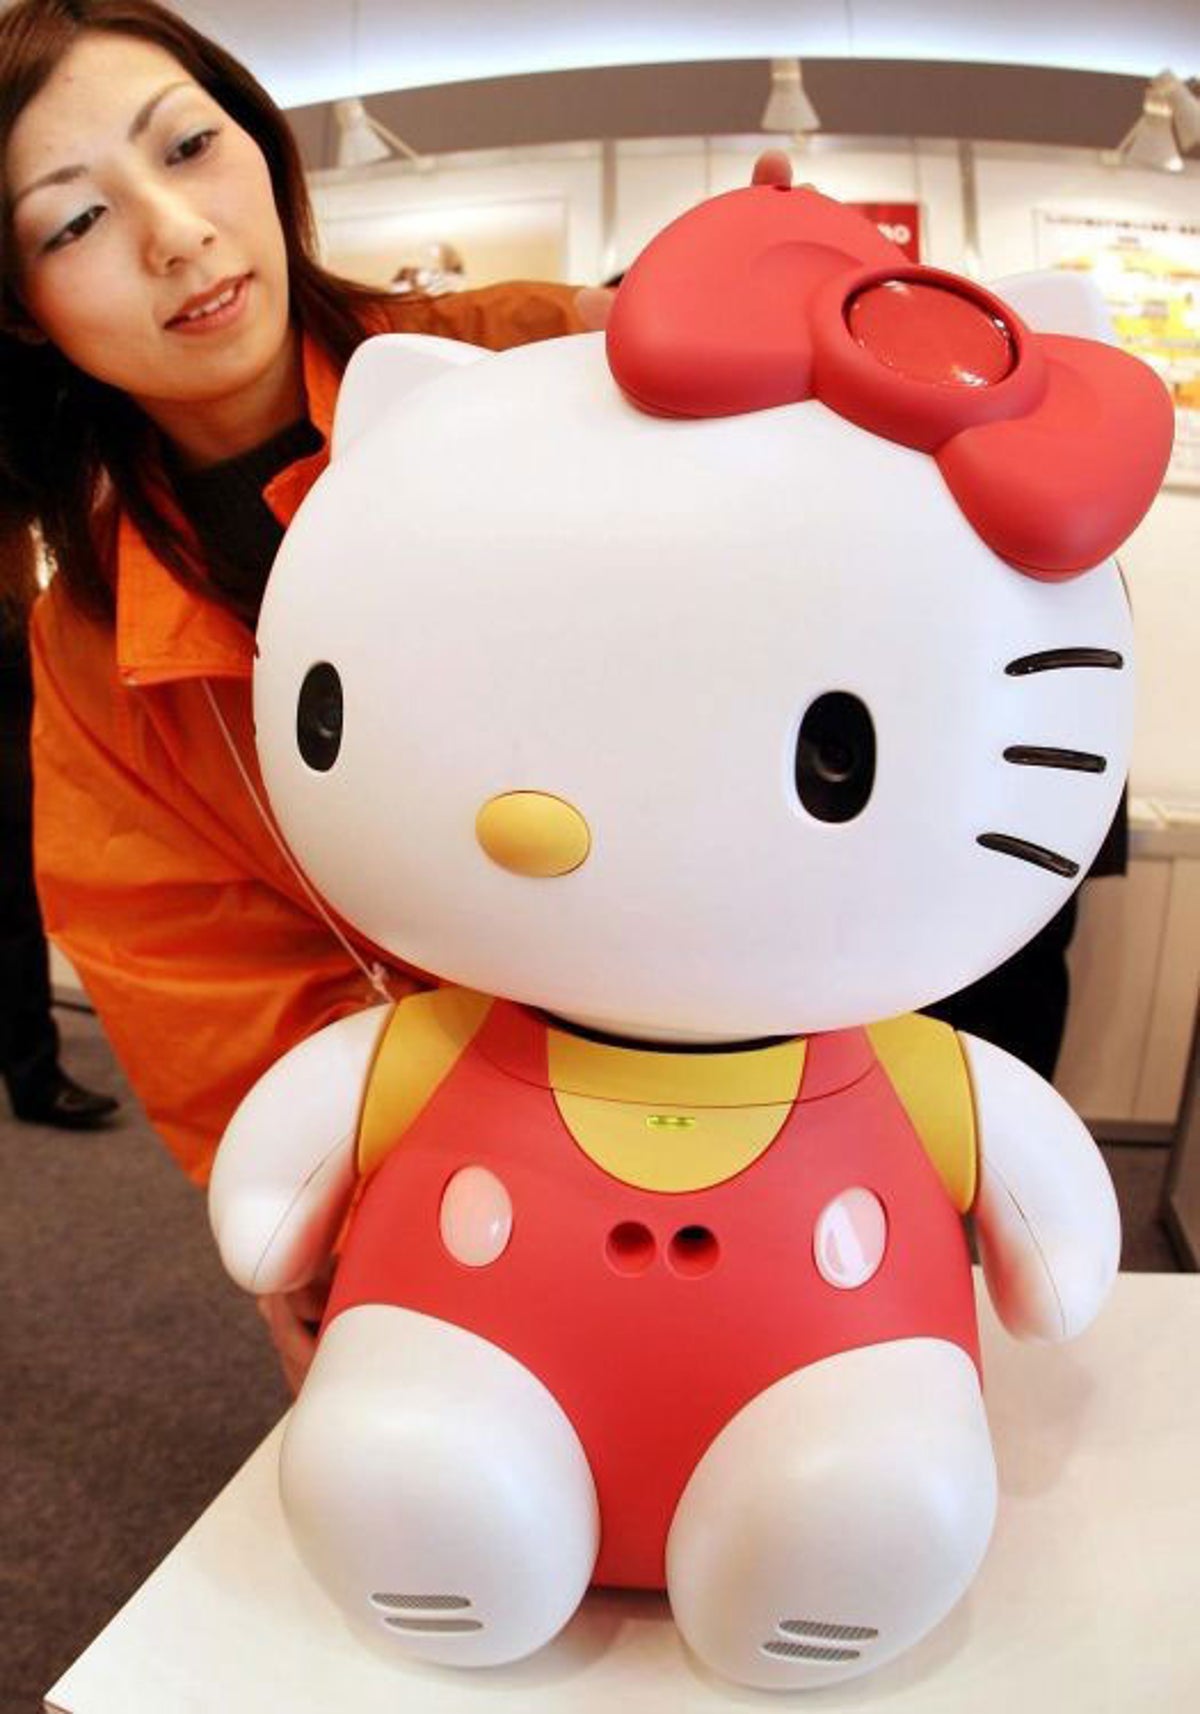 Top cat: how 'Hello Kitty' conquered the world, The Independent